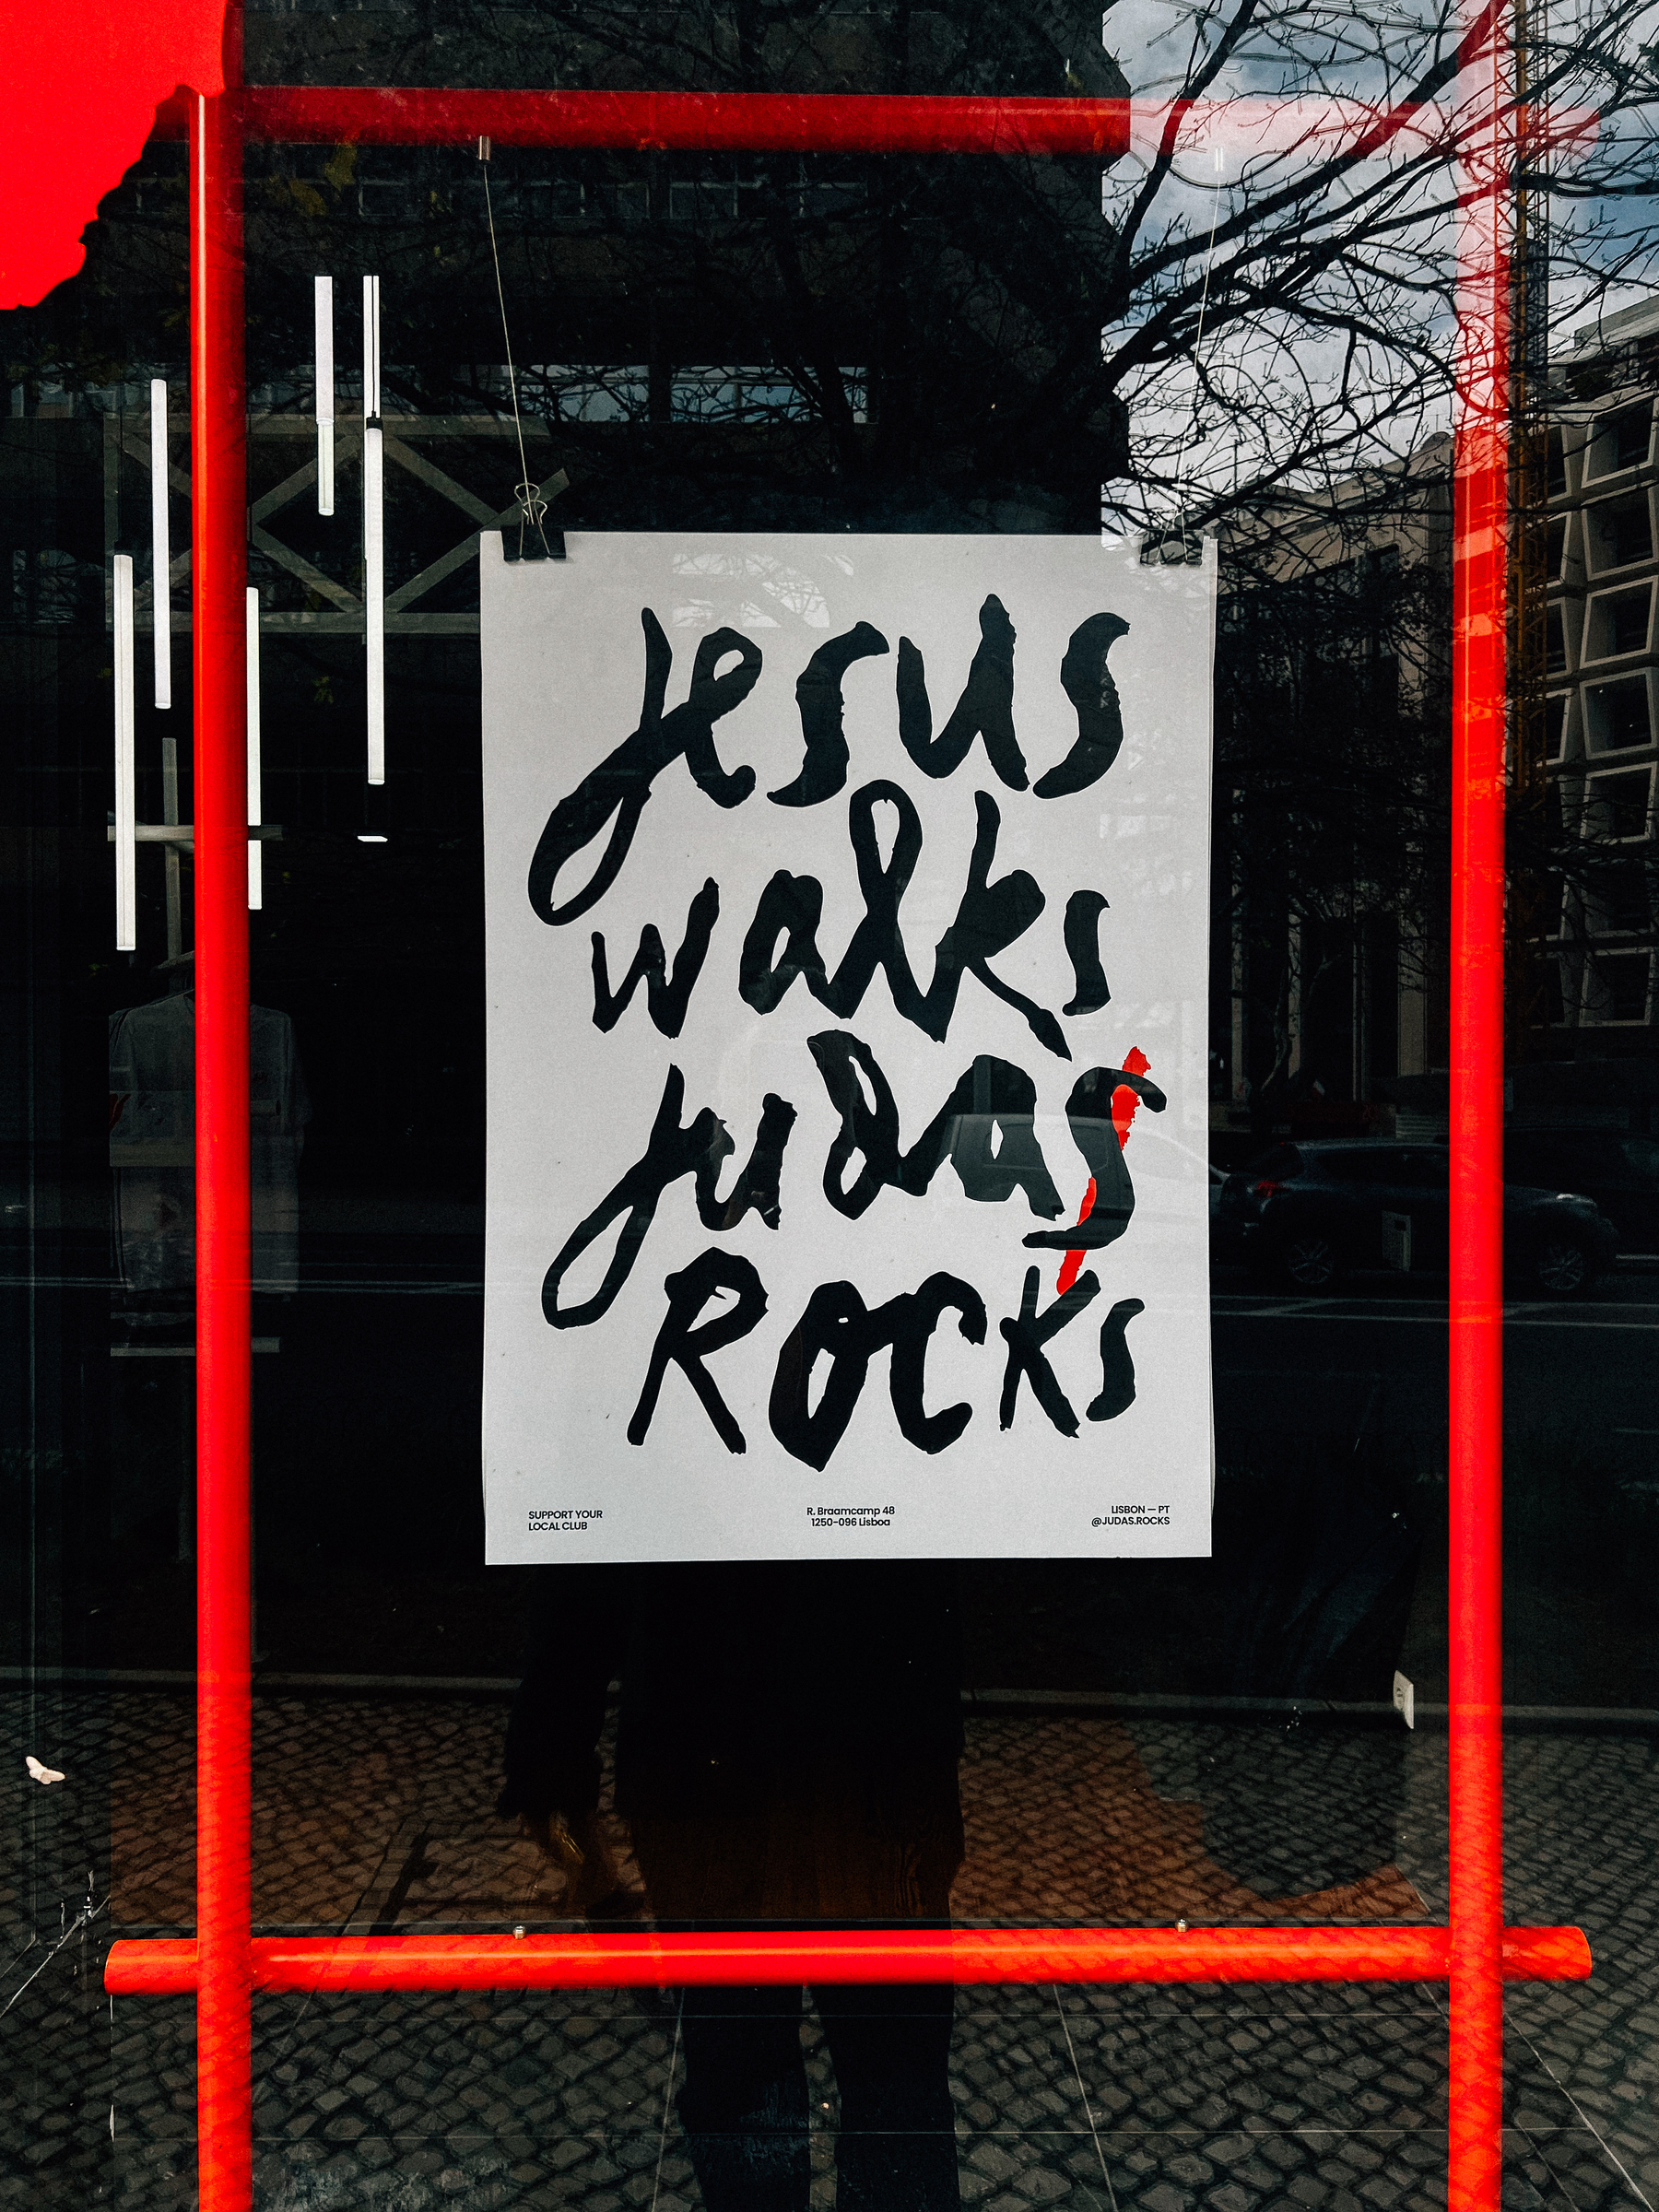 A poster with the phrases &ldquo;Jesus walks, Judas rocks&rdquo; displayed in a window, with a red frame and a reflection of a person standing in front of it.